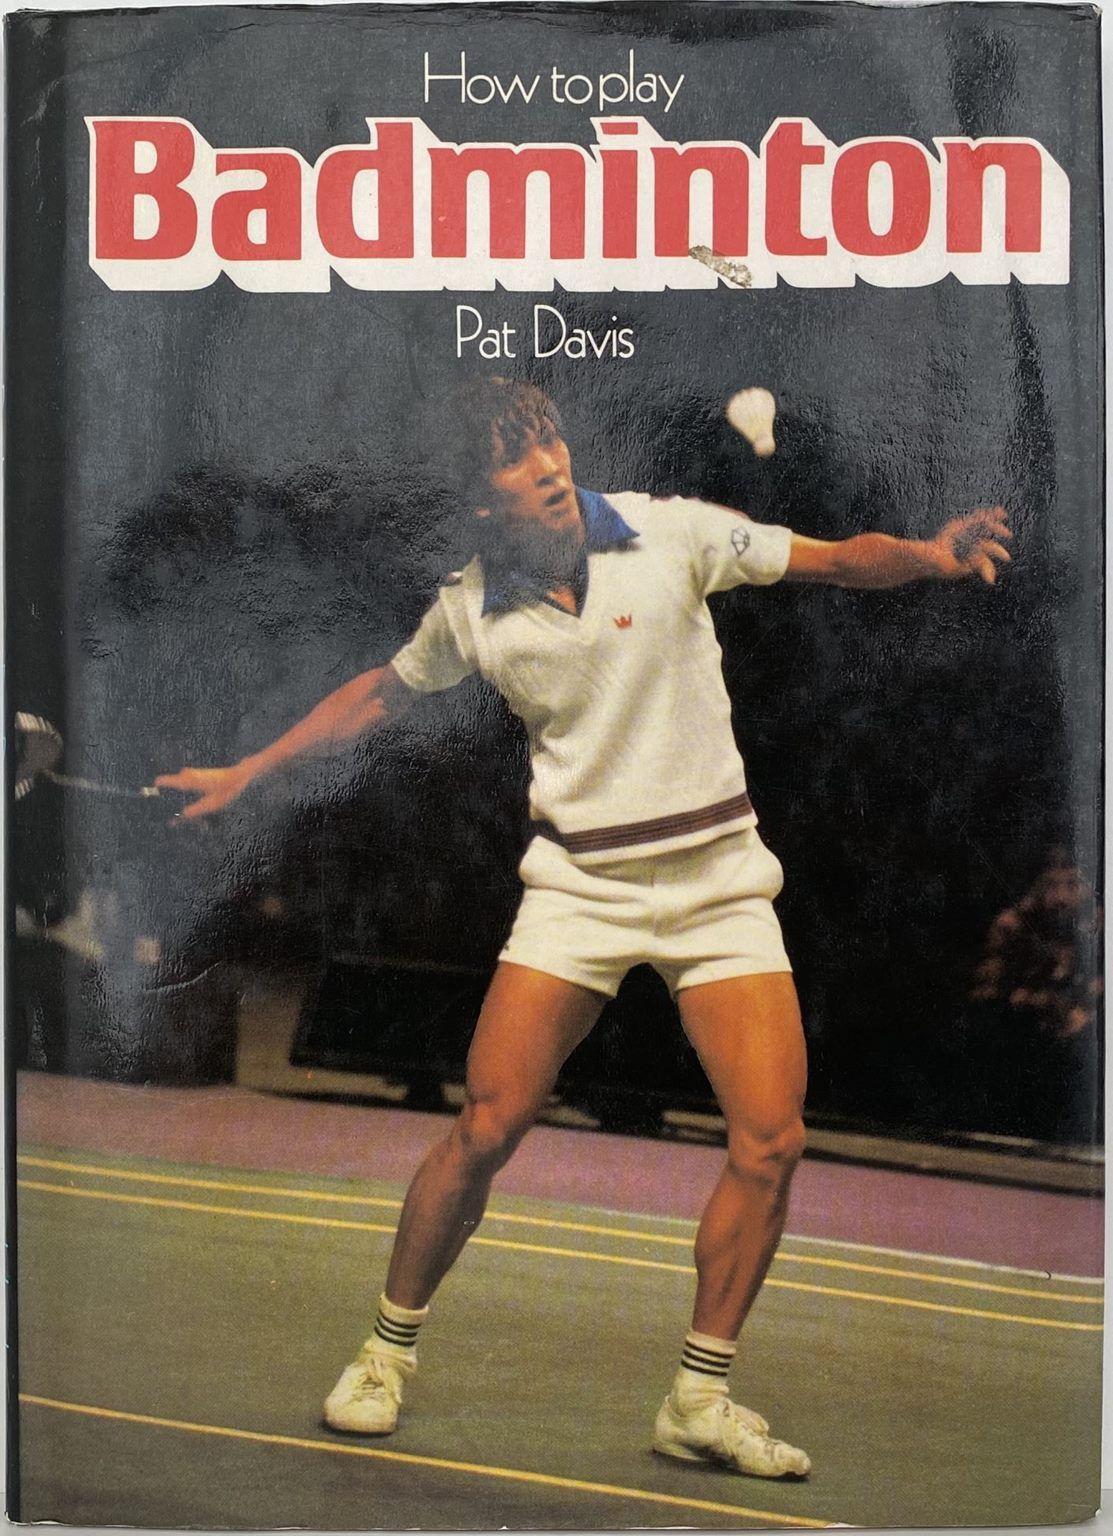 How to play Badminton